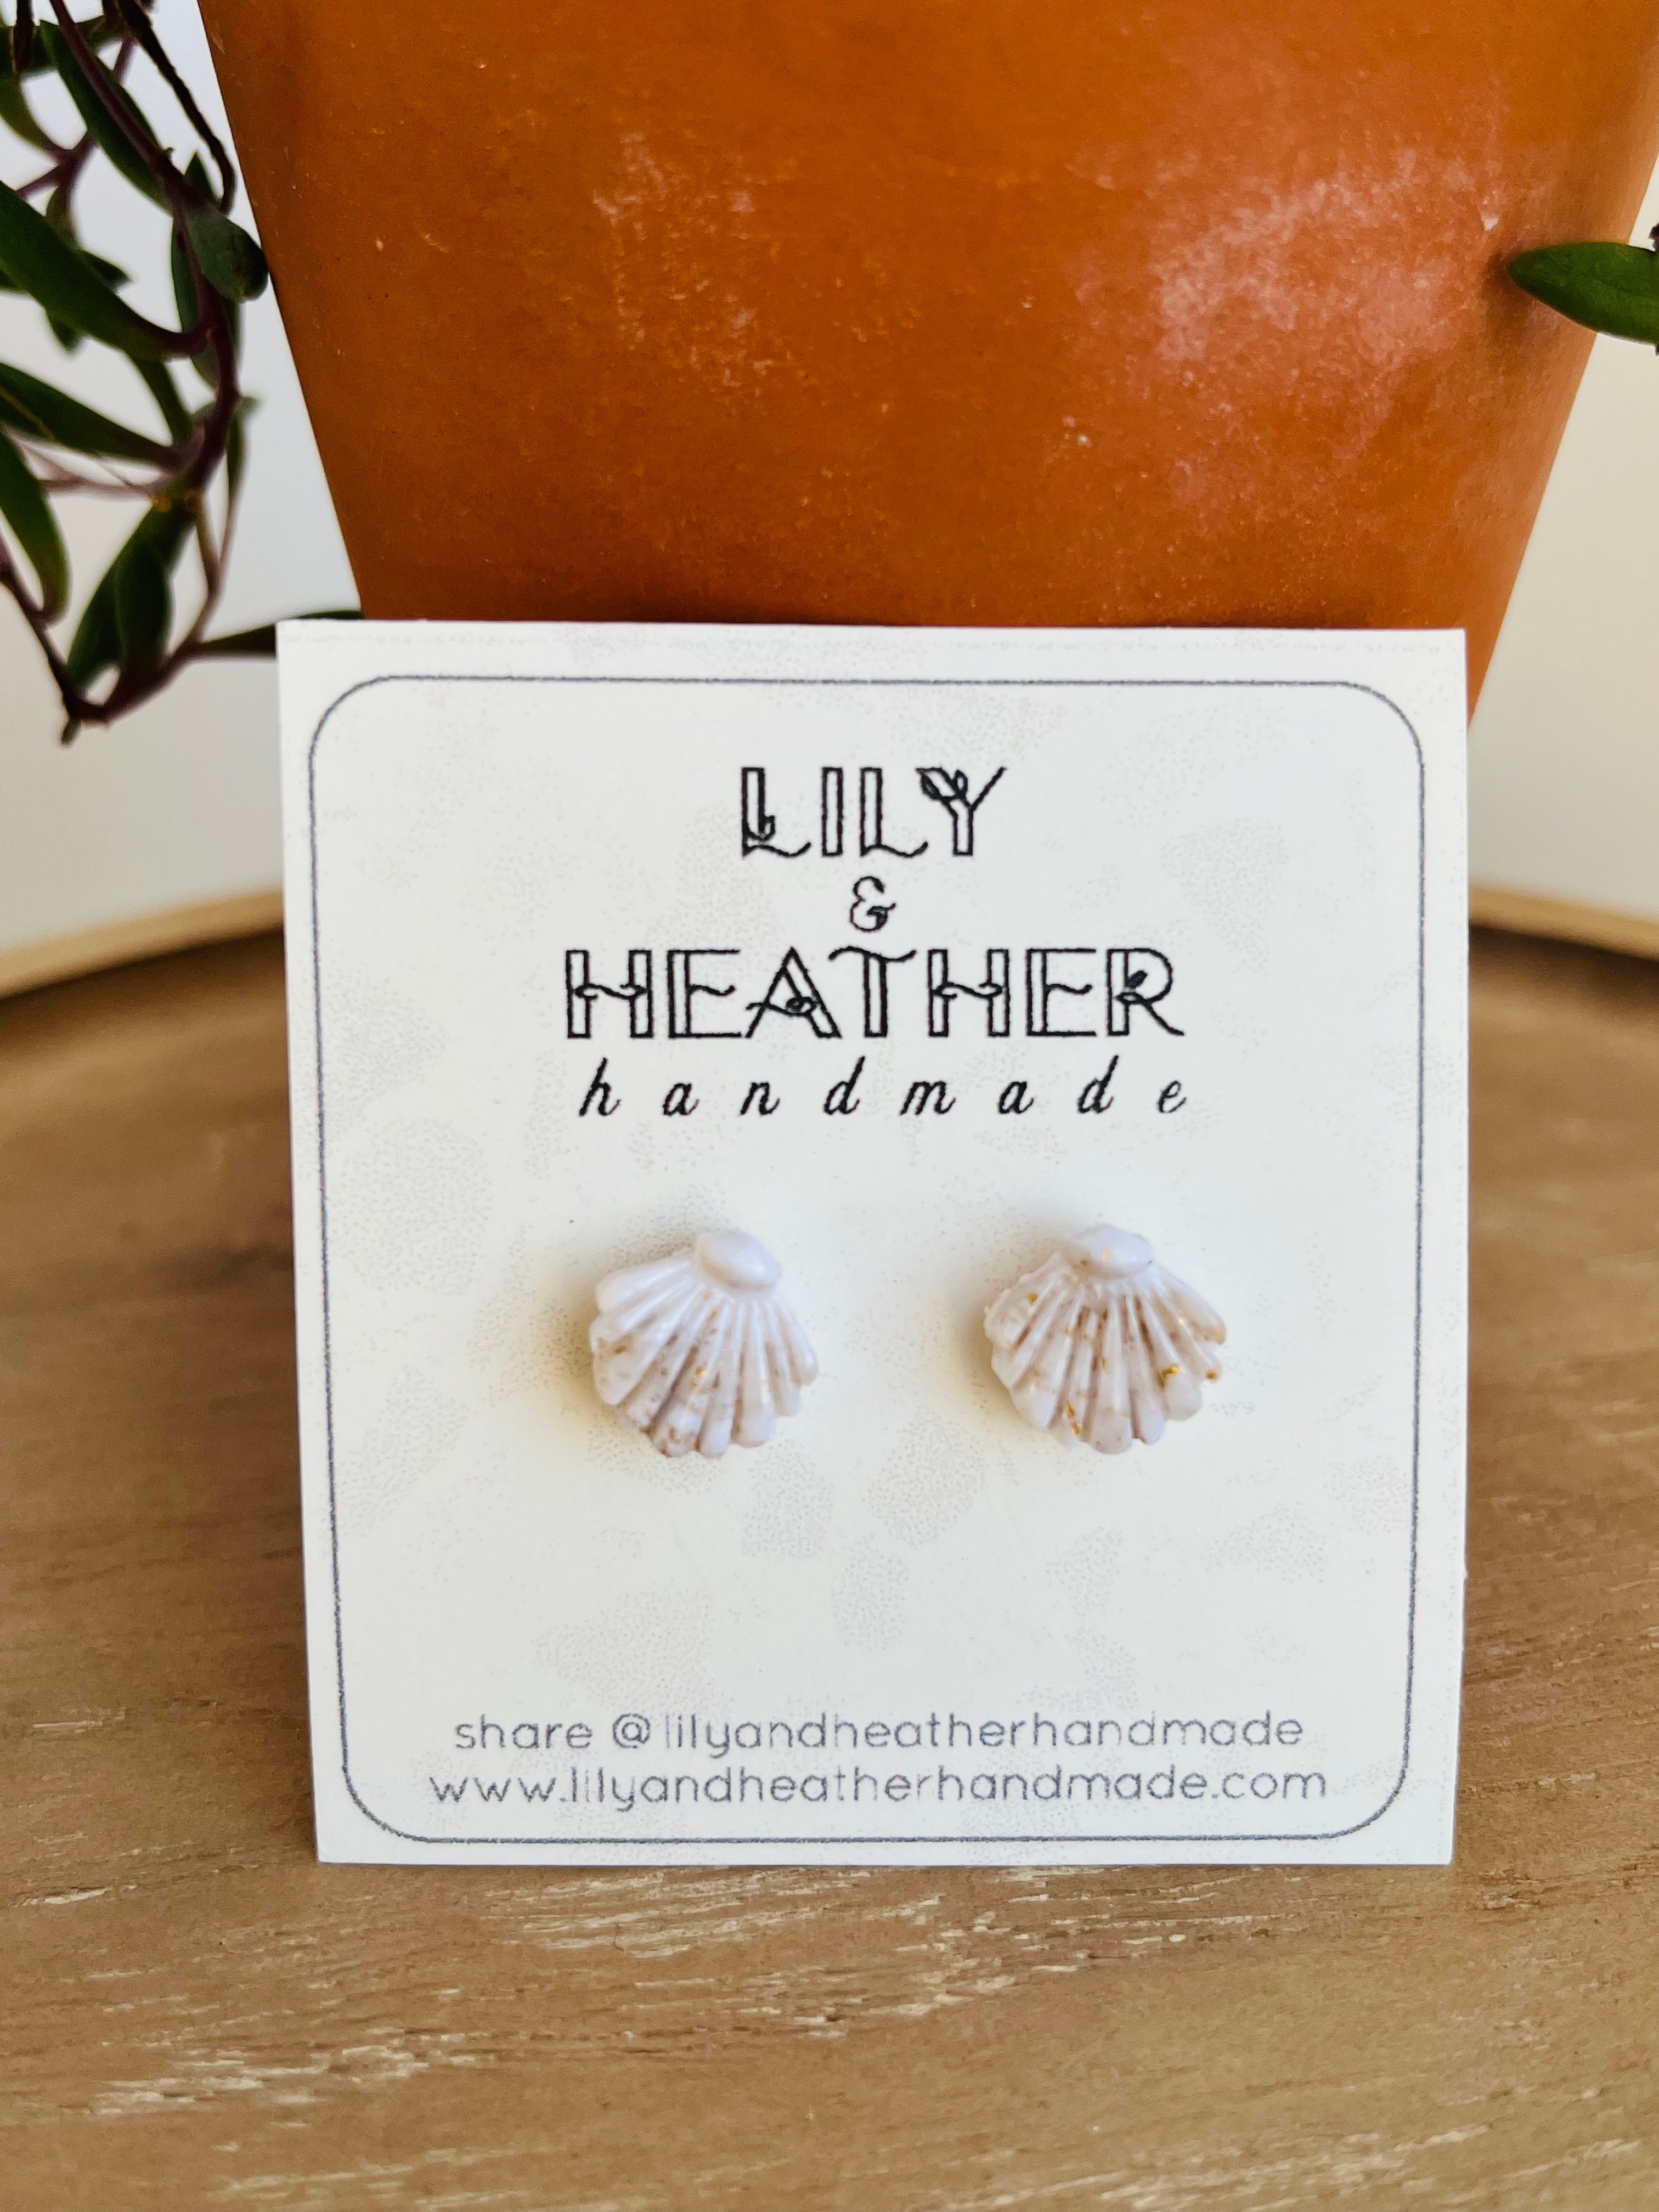 Scallops studs - earrings from Lily & Heather Handmade